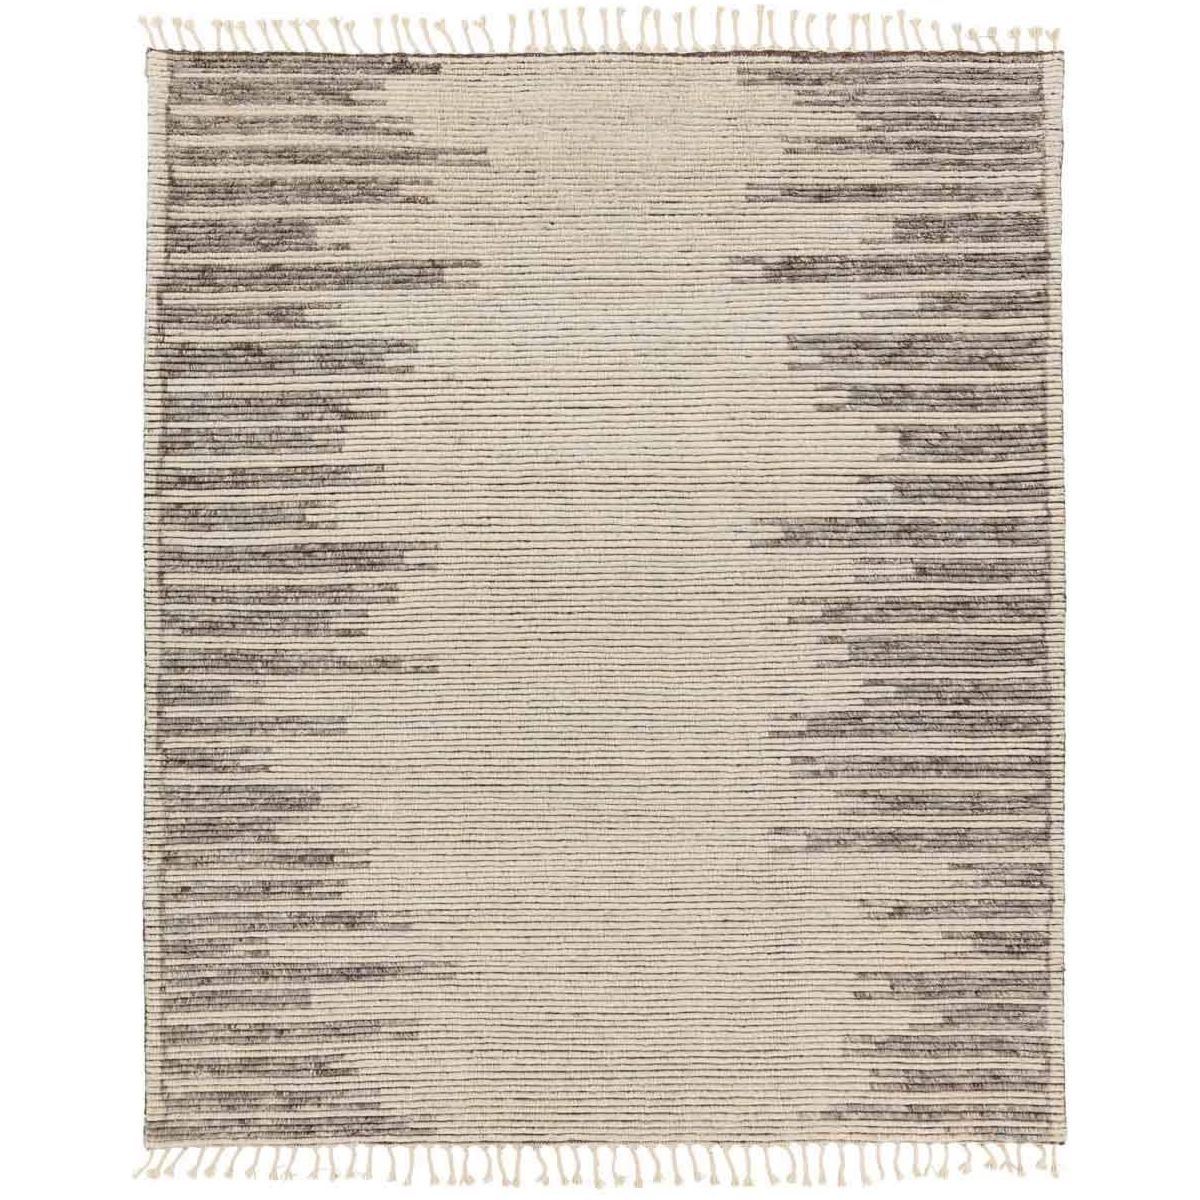 Inspired by textiles from the Tullu region in Morocco, the Patra area rug showcases a linear design in neutral shades of cream, taupe, brown, and gray. This high-piled accent lends warmth and comfort to any space with durable wool hand-knotted onto a cotton foundation. Braided fringe trims the edges for a touch of boho charm. Amethyst Home provides interior design, new home construction design consulting, vintage area rugs, and lighting in the Washington metro area.